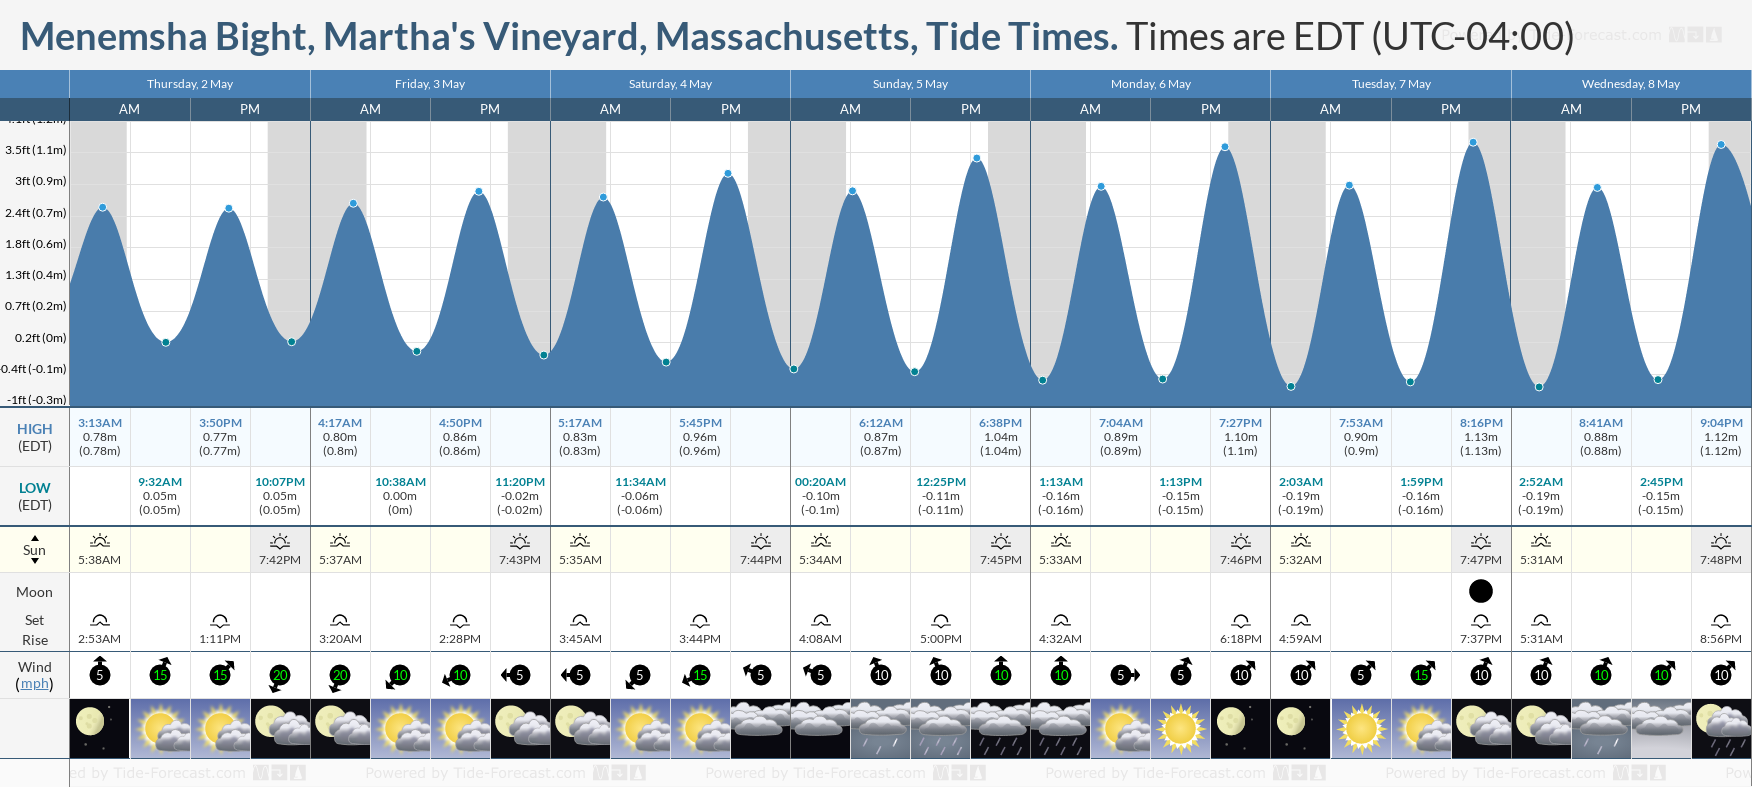 Menemsha Bight, Martha's Vineyard, Massachusetts Tide Chart including high and low tide times for the next 7 days